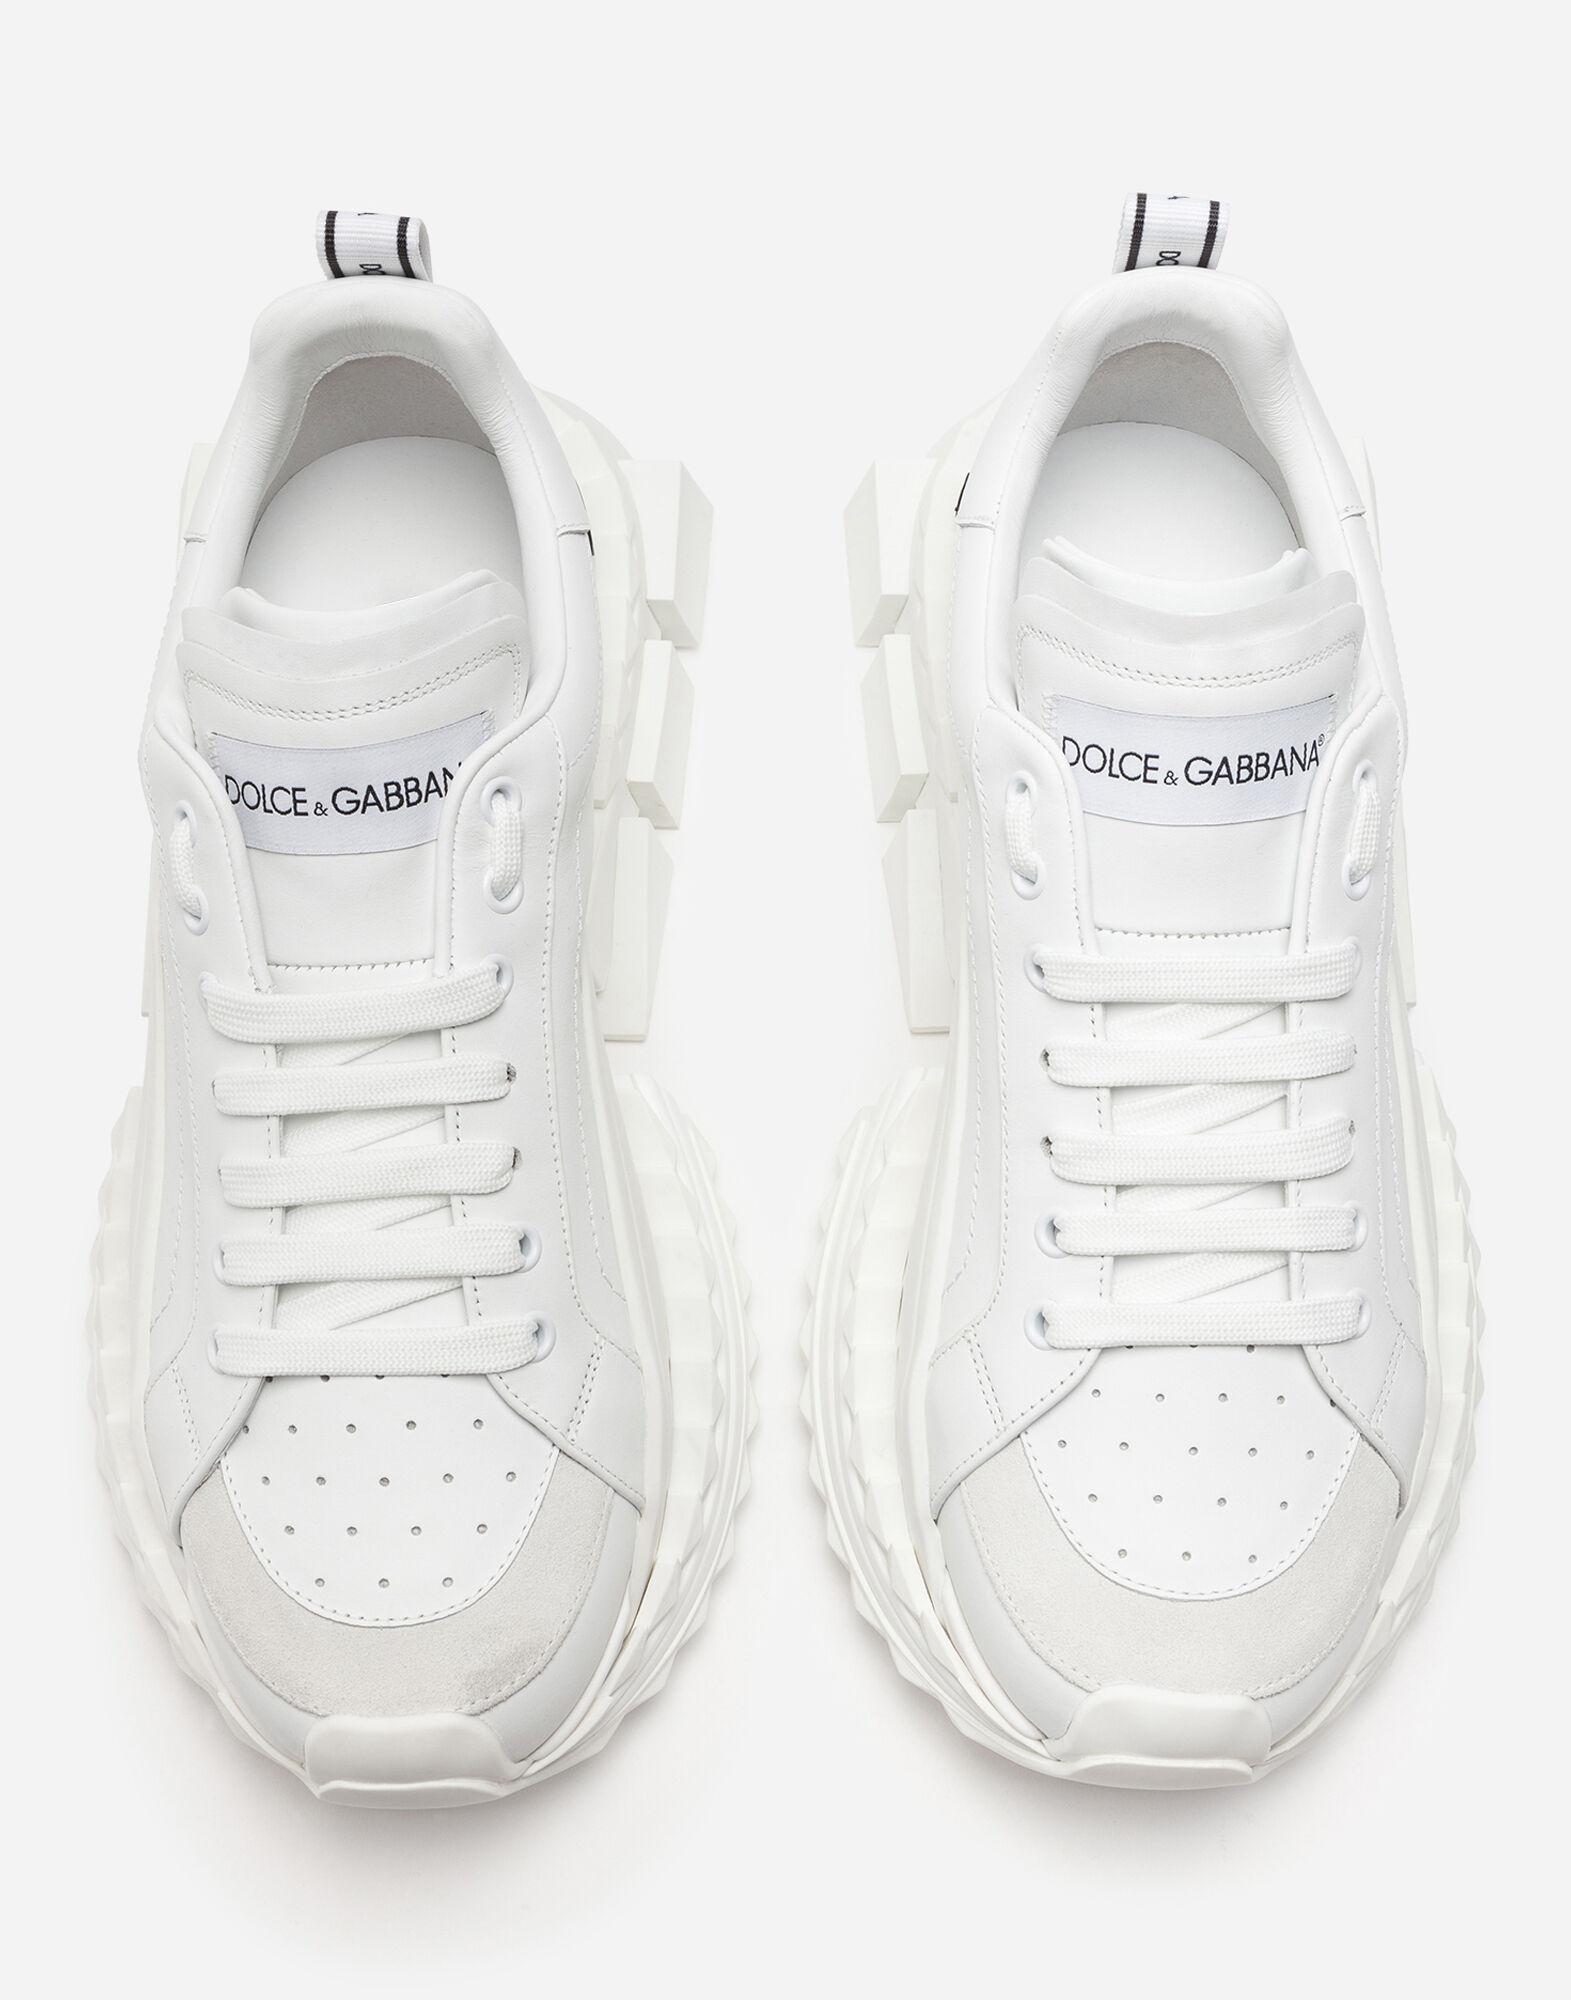 Dolce & Gabbana Leather Super King Sneakers in White for Men - Lyst